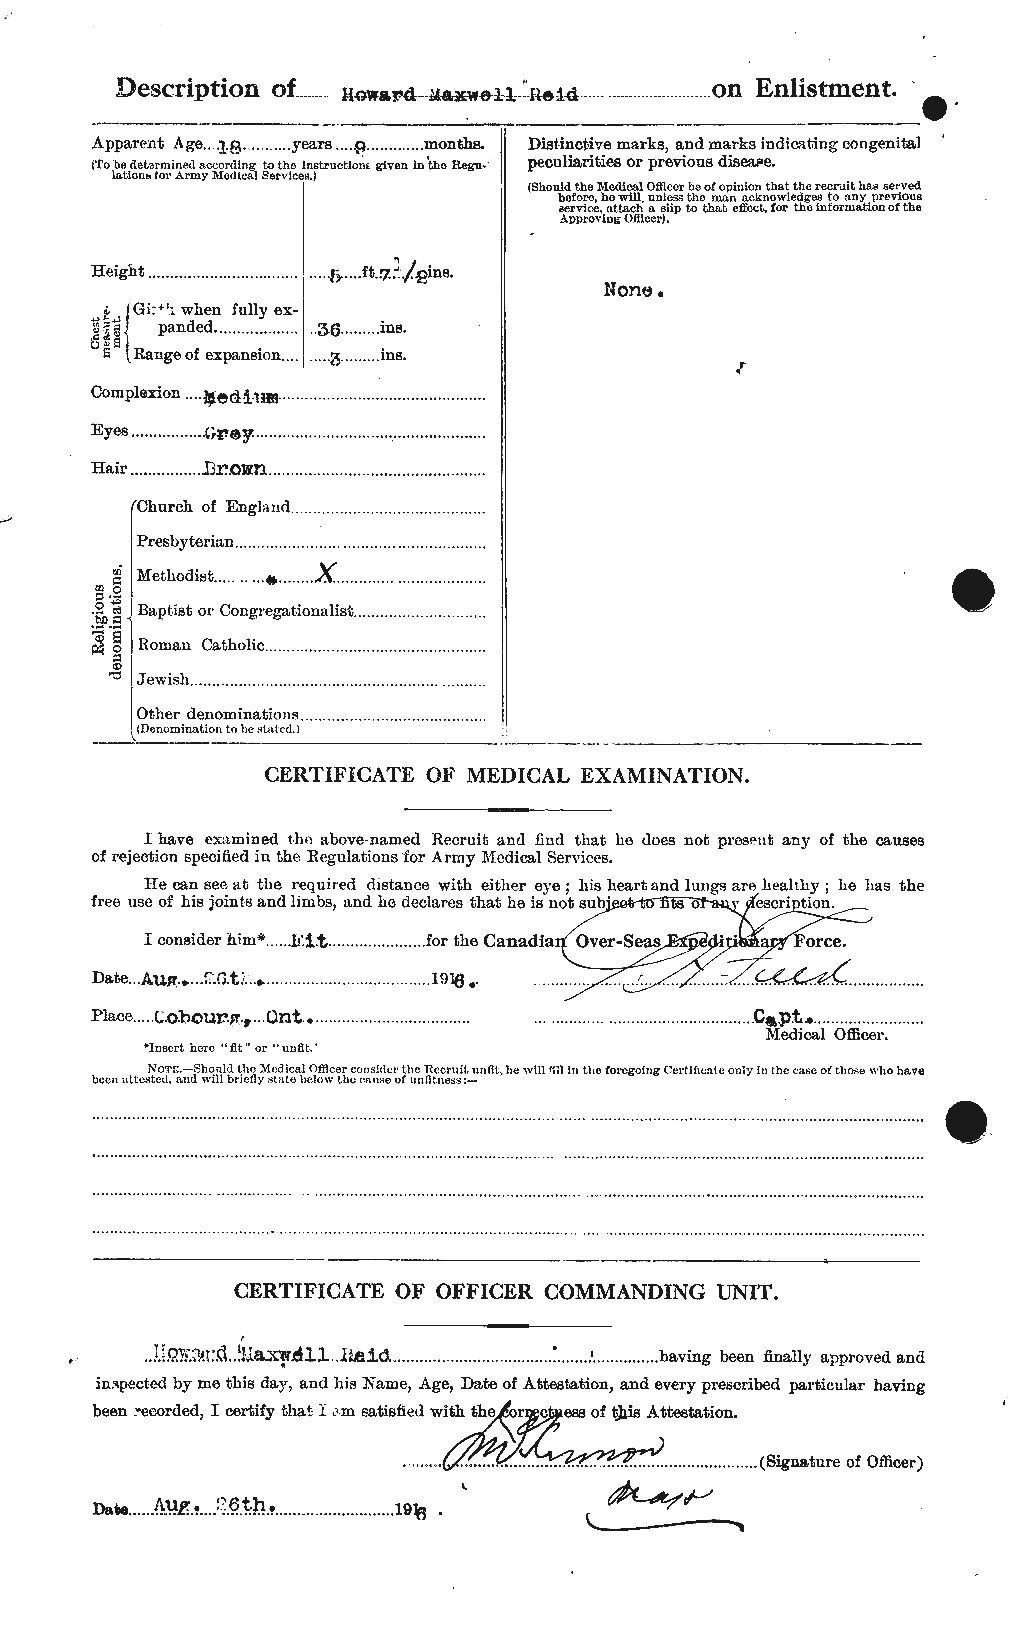 Personnel Records of the First World War - CEF 598621b